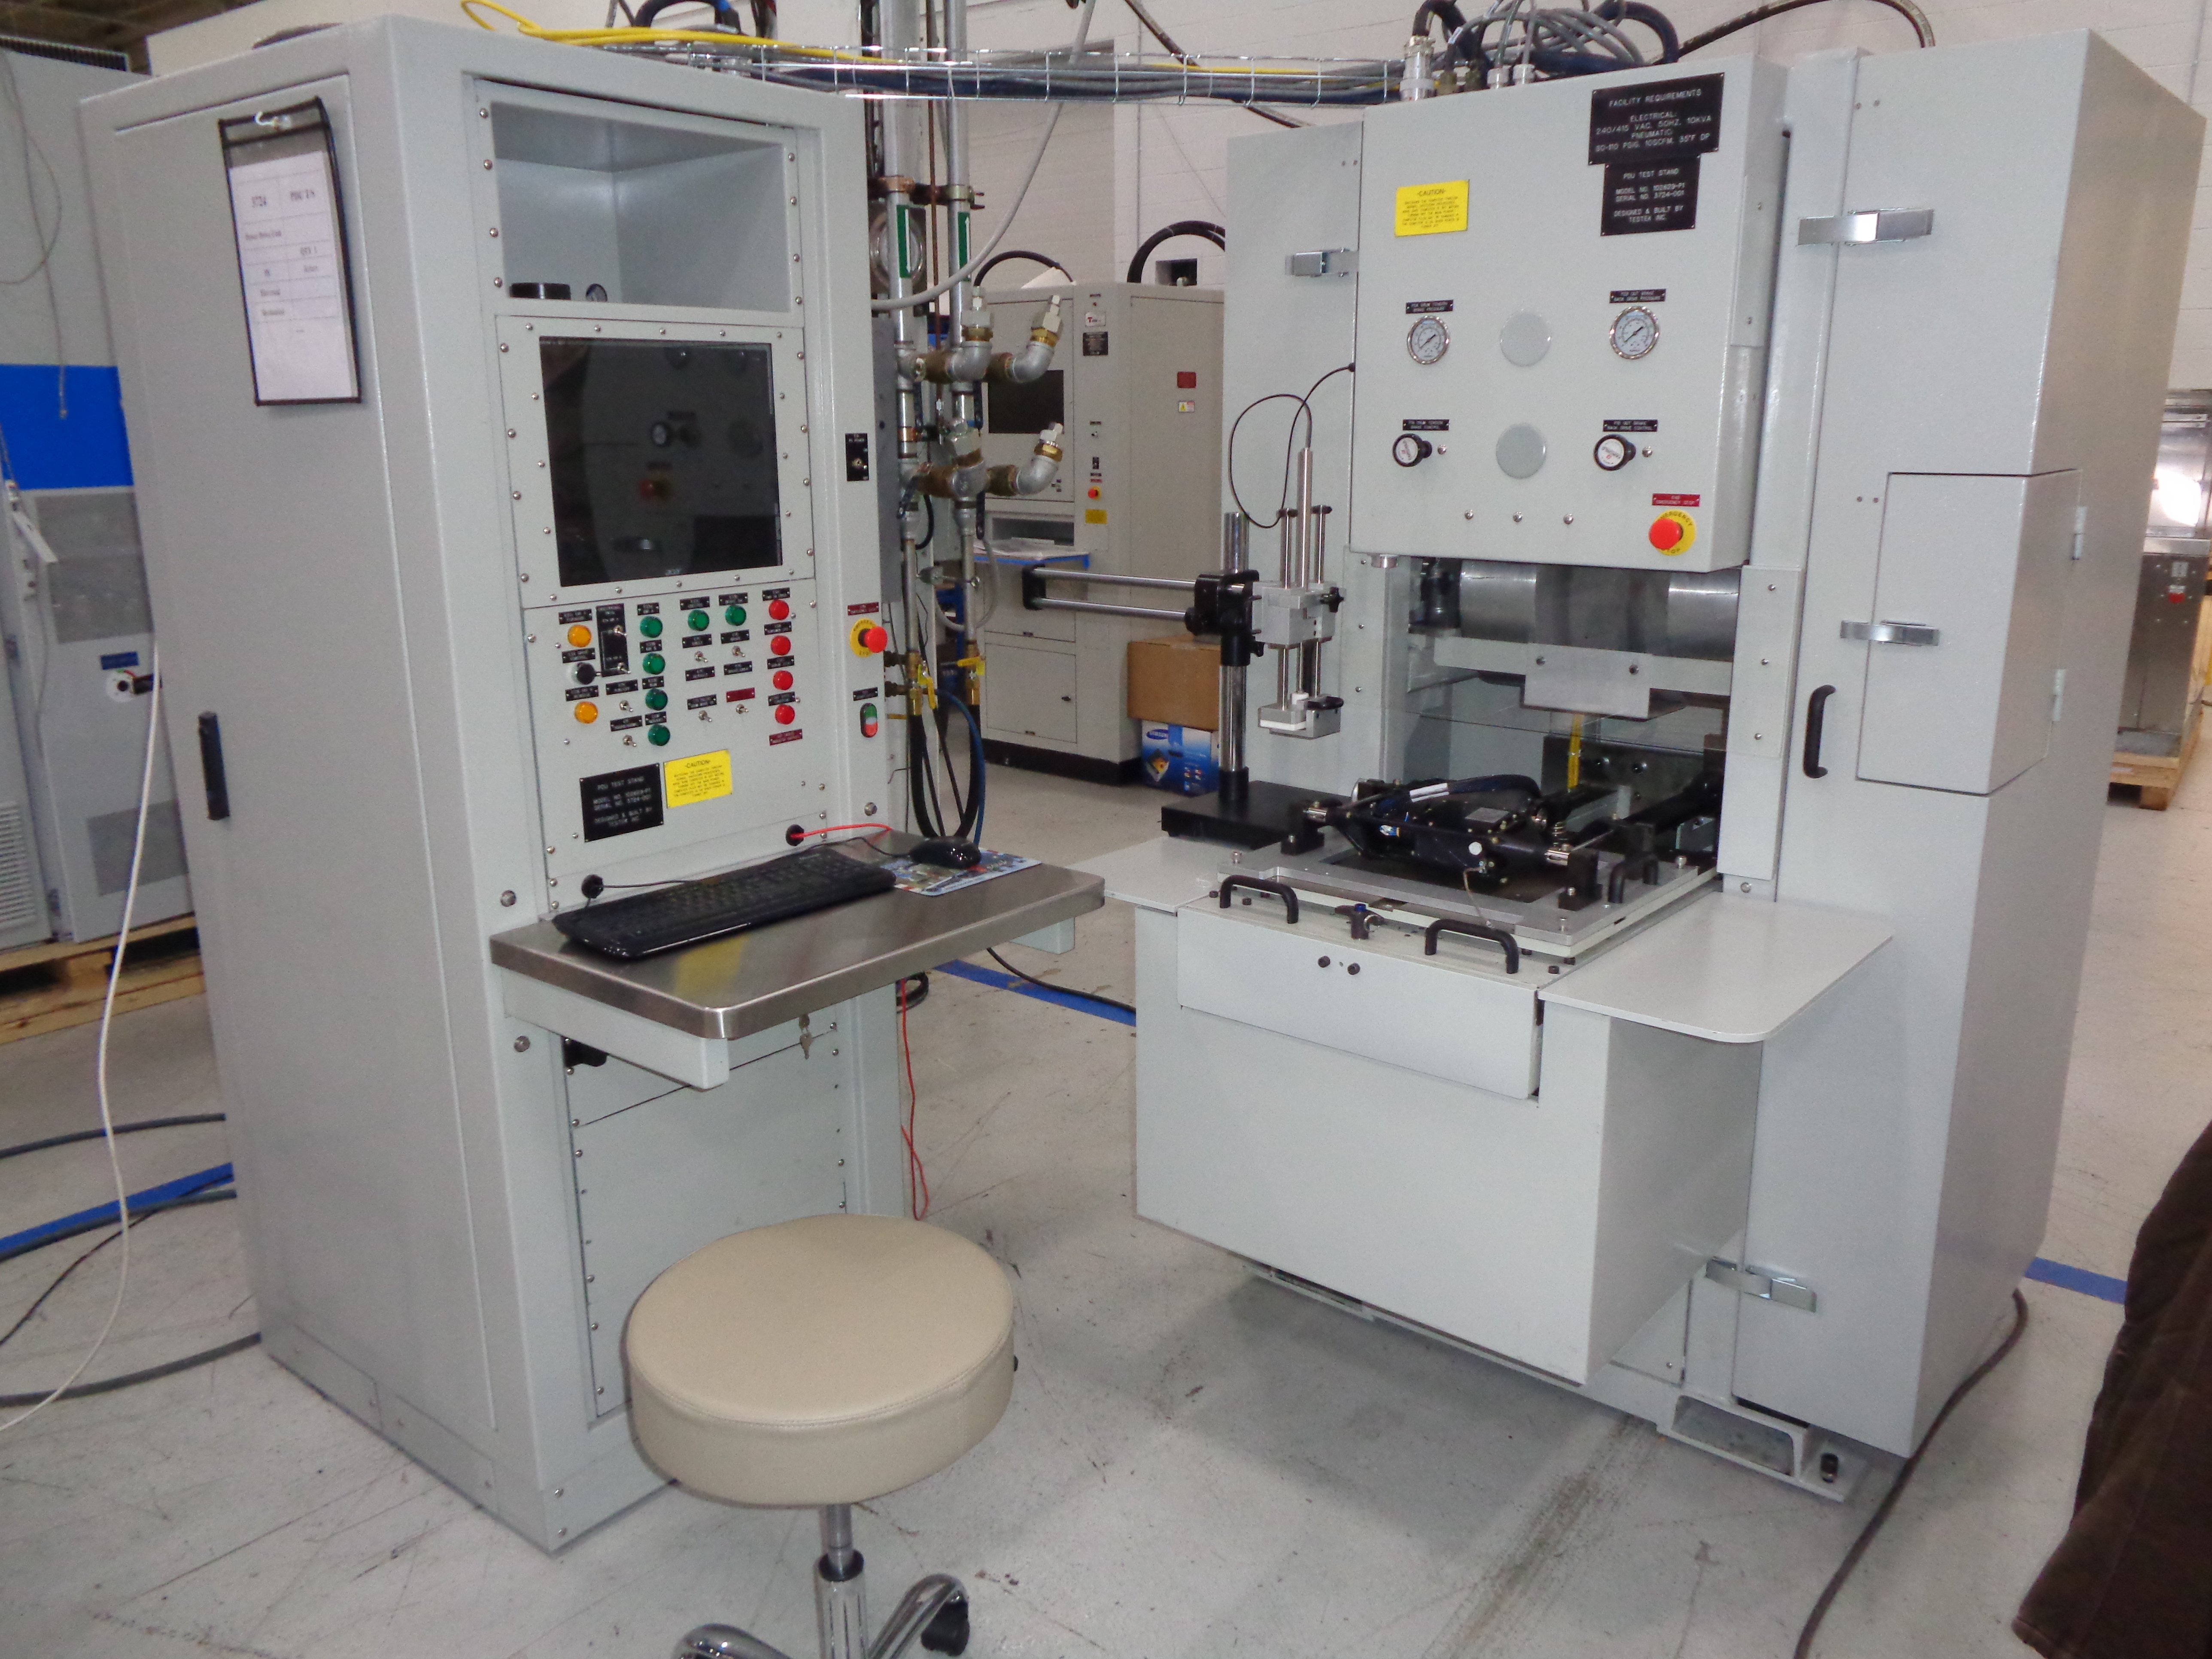 PDU Test Stand Licensed by Major OEM, Installed at Middle Eastern MRO